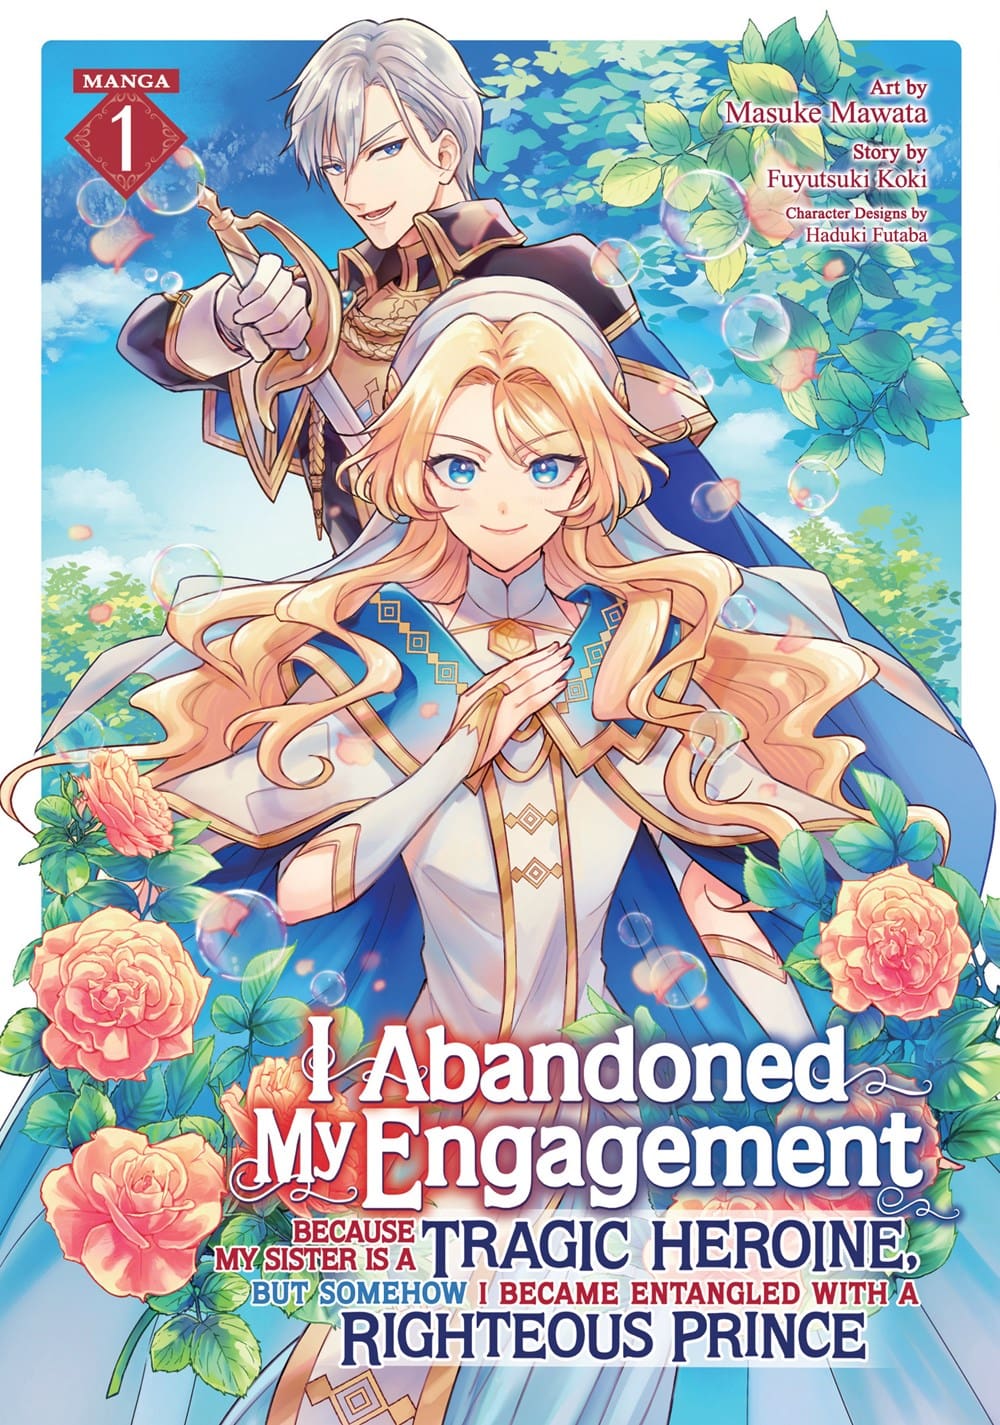 I Abandoned My Engagement Because My Sister is a Tragic Heroine, but Somehow I Became Entangled with a Righteous Prince